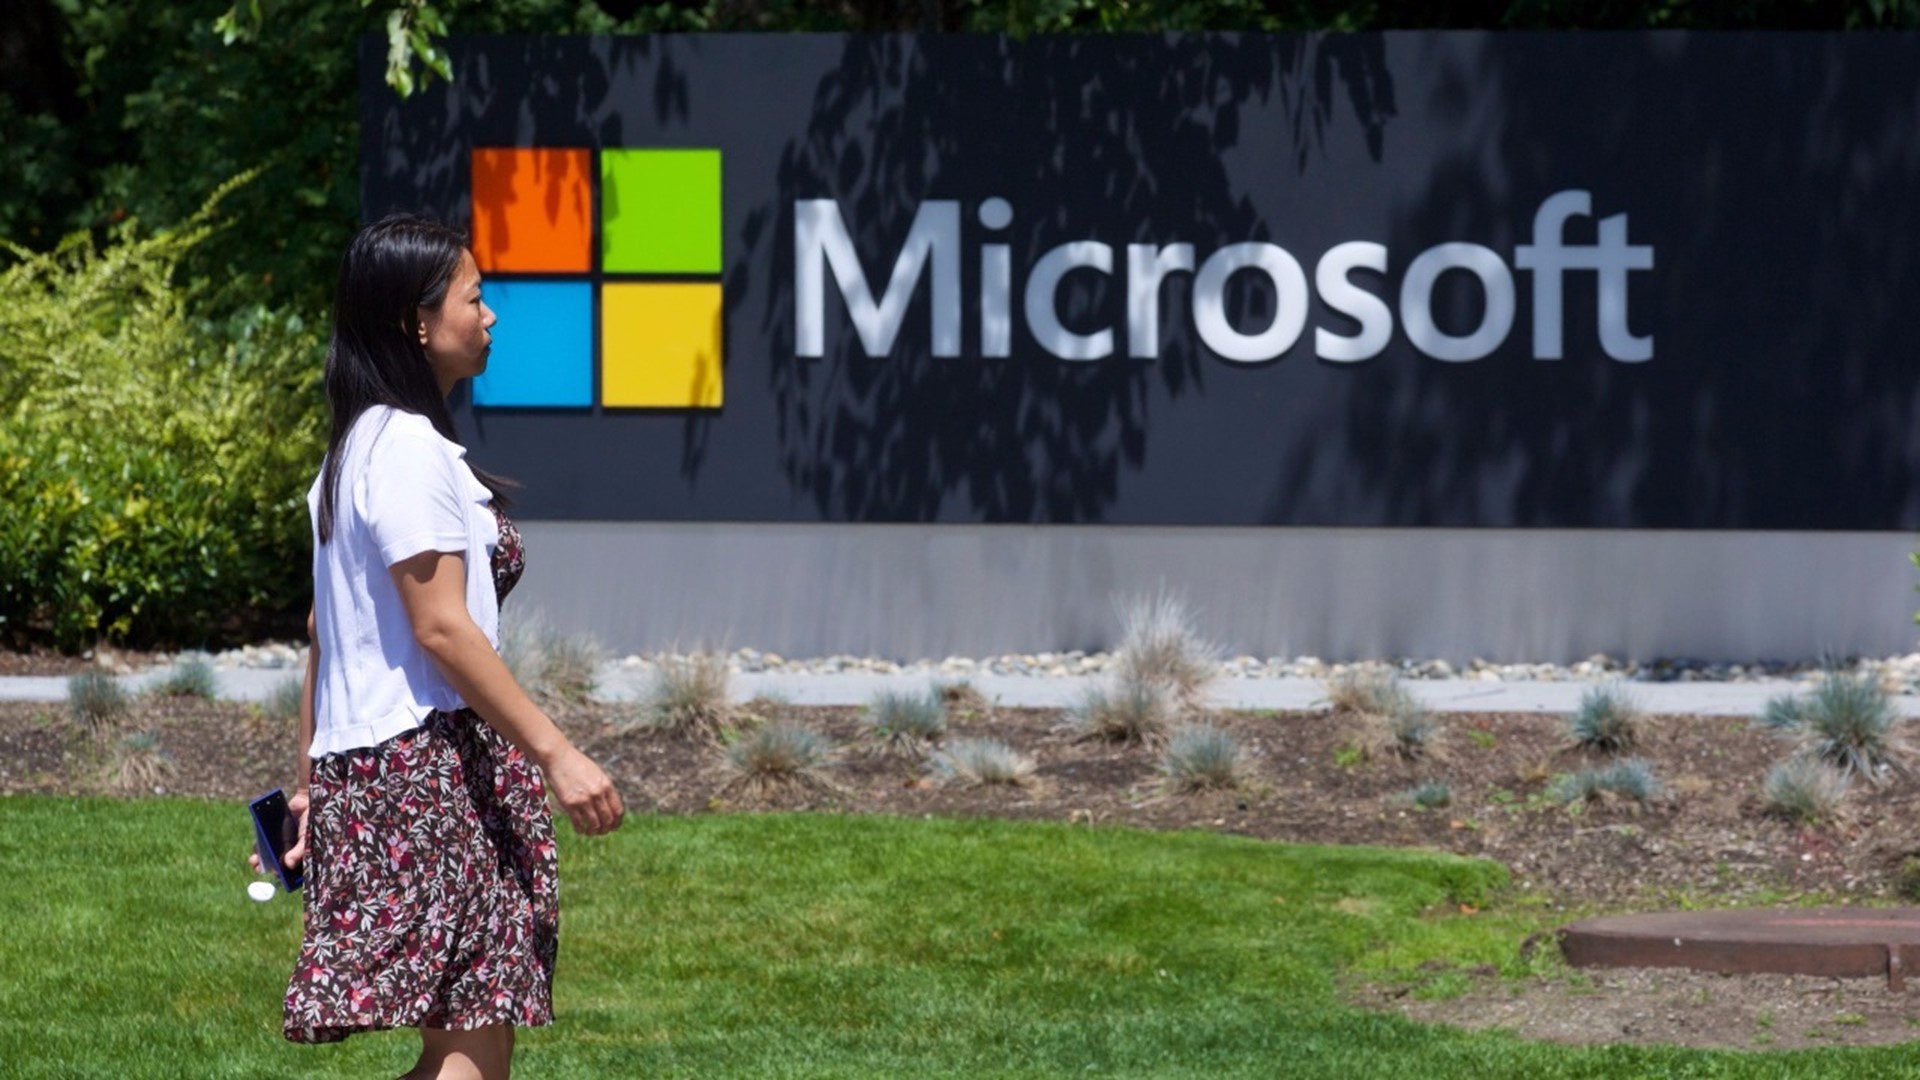 Microsoft said the layoffs were in response to “macroeconomic conditions and changing customer priorities.”